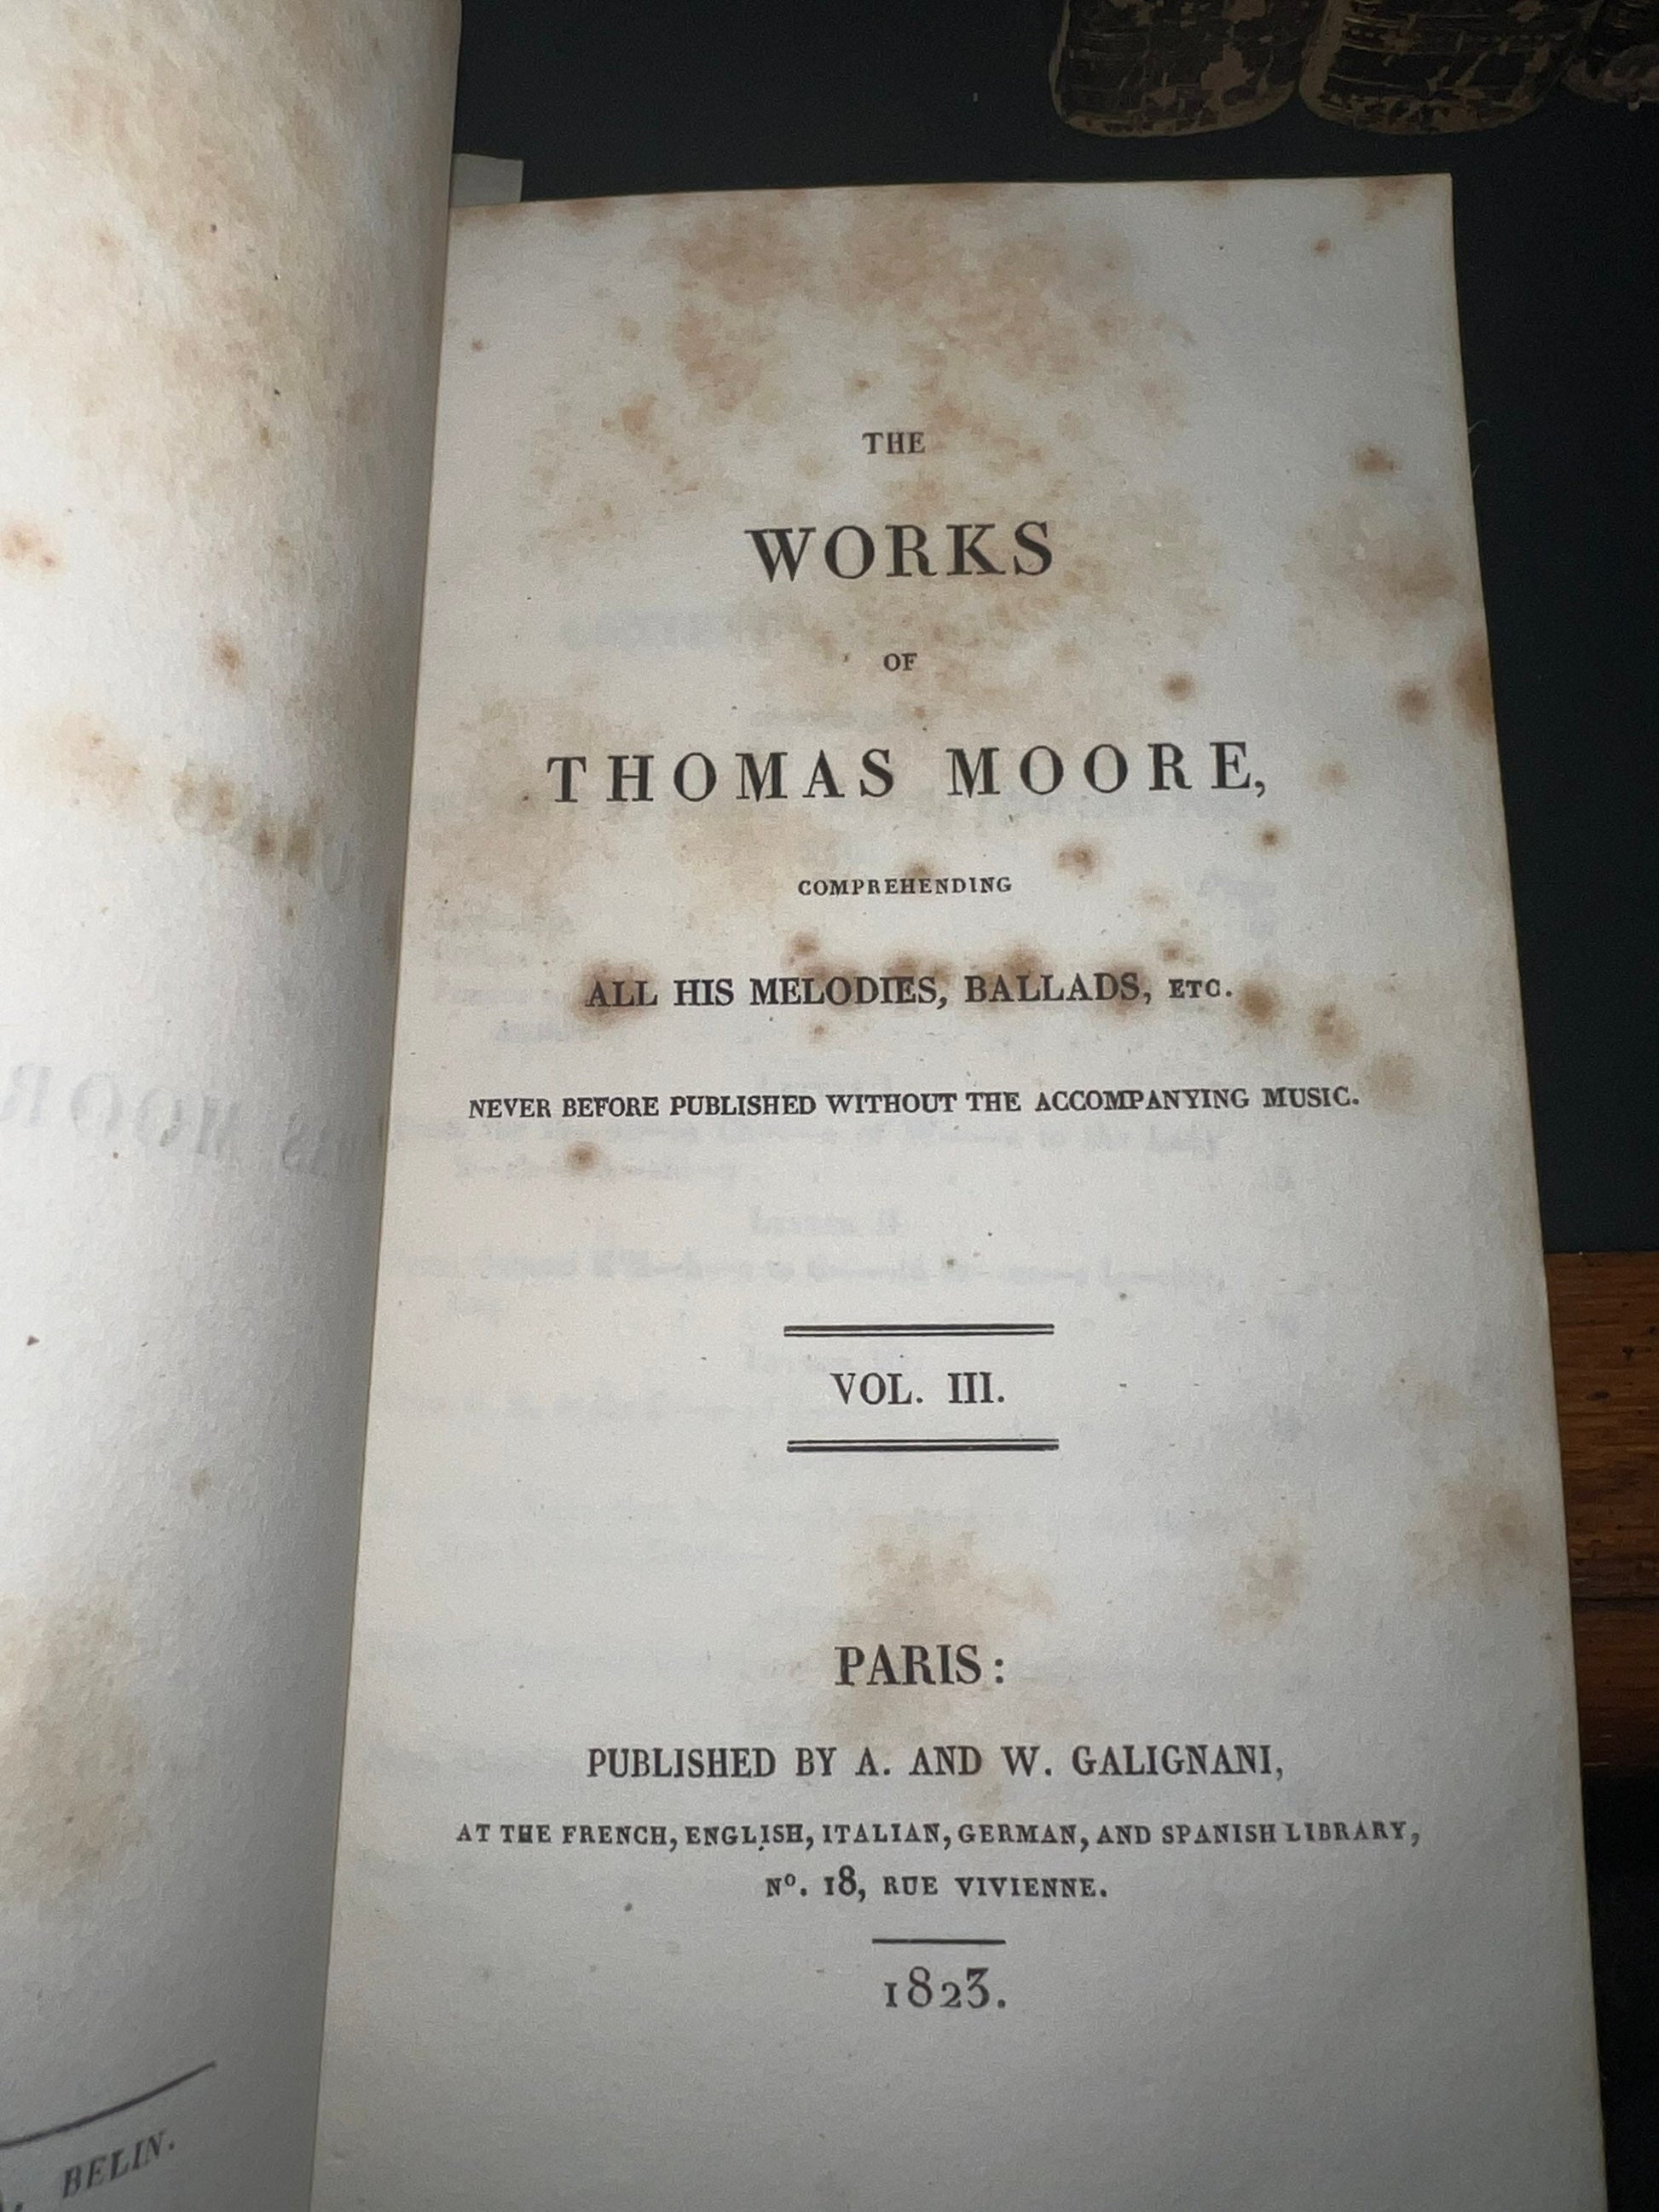 Antique early poetry 1823 - The works of Thomas moore - 10 volume set pre civil war